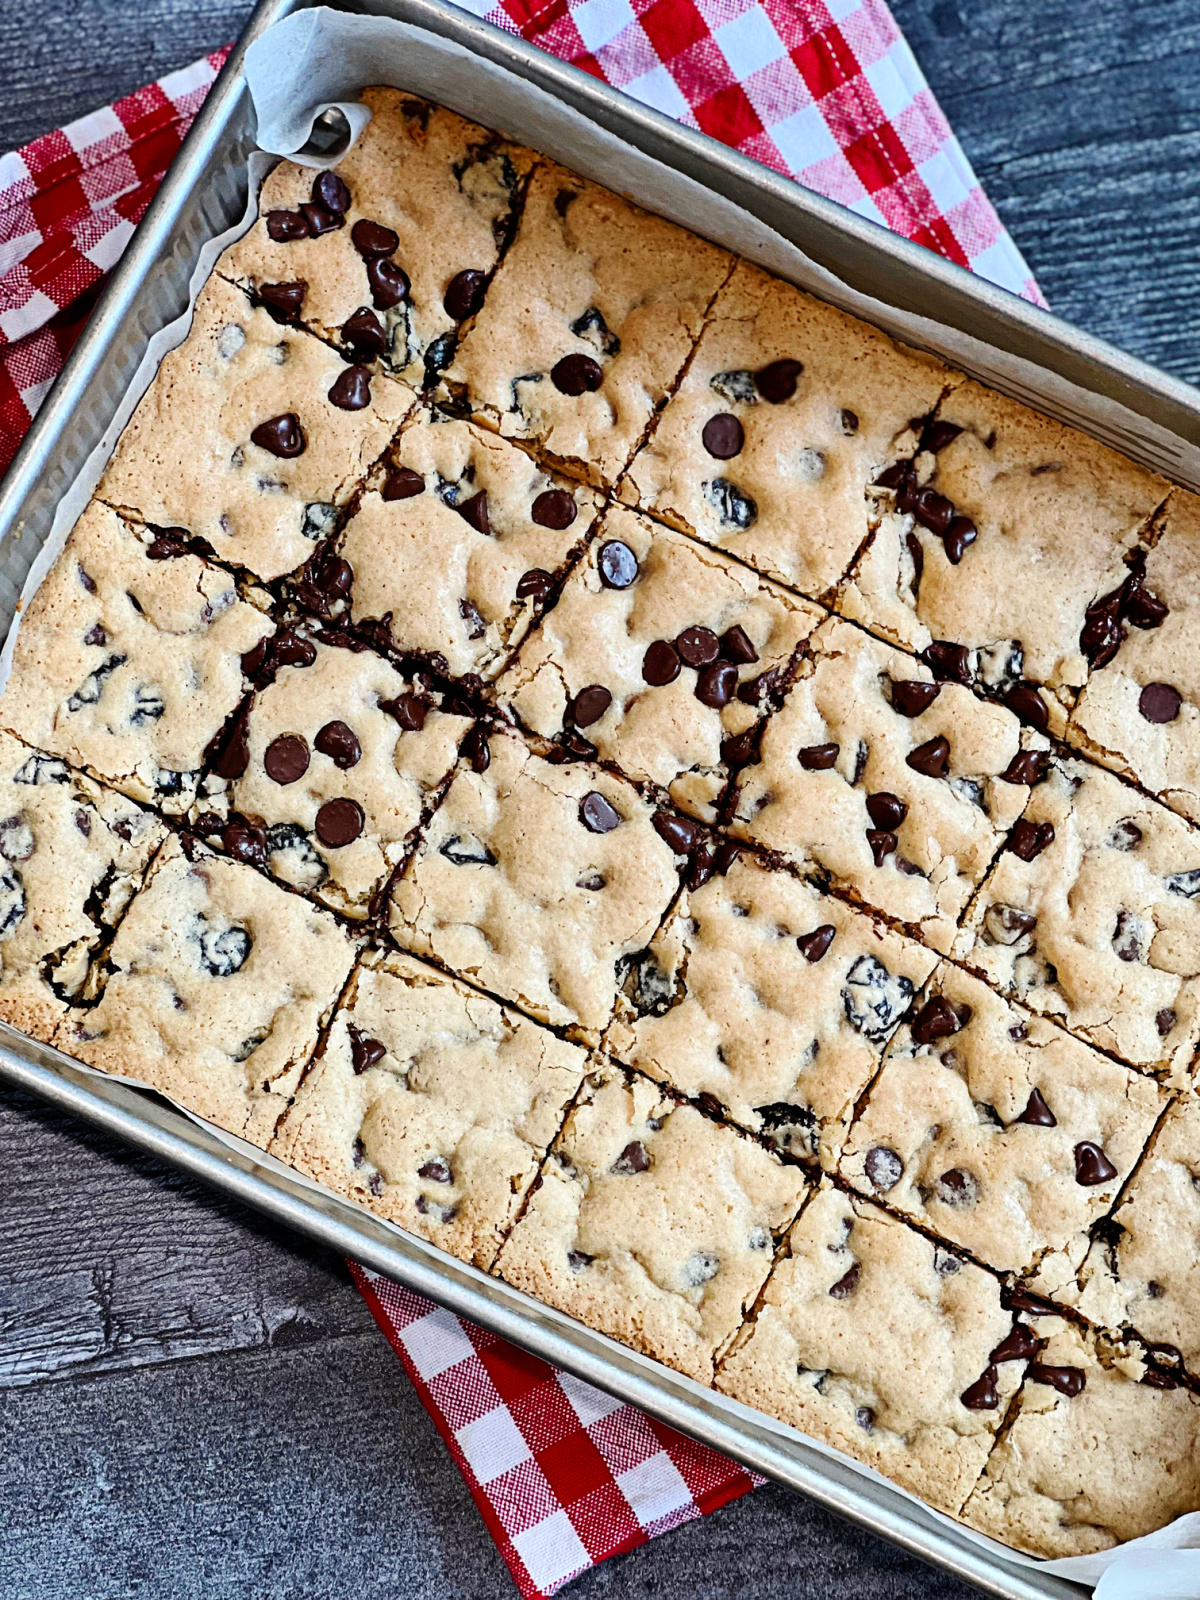 This is a new recipe for chocolate chip cookie bars, and they are so so, so good! I created them for our latest Everyday Dish video, and loosely based it off of a couple other chocolate chip cookie recipes of mine. They are really easy to make and you simply press the dough into a 9 x 13-inch pan. I will be sharing more flavor variations of this recipe too.  Disclosure: This post contains affiliate links. As an Amazon Associate, I earn from qualifying purchases. Before I get to the cookies though, I really want to share a bit about the amazing Ankarsrum mixer. It's from Sweden and has been around since the 1940's. What I really love though is the power and engineering of the machine. It's unlike the stand mixers that we're all so accustomed too. First off is the engineering. It kneads smooth and silky doughs, due to its roller and scraper design. This method mimics kneading by hand, without the time and effort. It has a 7 1/2 quart stainless bowl that revolves as the mixer runs, and the fluted roller acts as your fingers, with the scraper mimicking the palm of your hand. The scraper folds the dough with a rhythmic motion while the roller turns. Not only does this perform magic with bread doughs (and yes, even gluten-free doughs!), but it's magic with cookie and other doughs too. It also comes with a special bowl and whisks for making fluffy meringues and whipped toppings (I'm looking at you aquafaba and whipped coconut cream!). Needless to say that I am head-over-heels for my Ankarsrum mixer (which I have named Astrid thanks to my friends Matthew and Per in Sweden). She's also a looker, thanks to the gorgeous retro colors and design, but like they say "the proof is in the pudding."  Astrid continues to blow me away every time I bake. You can check out the Ankarsrum mixers here on Amazon and also on the Ankarsrum website here. To make the bars I use my favorite gluten-free flour blend recipe here on the site. I make sure to use the half amount of xanthan gum in the flour blend, which I suggest in the recipe for cookies and cakes. I also use a little melted virgin coconut oil, oat milk (or soy or almond), a really good vanilla (like Nielsen-Massey for a punch of vanilla flavor), baking powder, brown and white sugar, and Maldon sea salt. A couple quick tips before I get to the recipe. The first is that I've made the cookie bars a number of times since filming the video, and you want to make sure that the dough is thick like a cookie batter, but still soft enough to spread in the pan. I found that if you mix the milk into the oil and sugar mixture, the batter comes out a little less thick and softer. This resulted in soft and slightly underbaked bars that were incredible (especially once frozen!). I also found that the bars come out a bit crisper when baked in a metal pan and a bit softer when baked in a ceramic one. I haven't tried using a glass pan. Do with that info as you like, but if you like softer and slightly underbaked cookies than use a ceramic 9 x 13-inch baking dish/pan. I think mine is a Le Creuset pan, which I've had forever. I know you're going to want to make these cookies stat! Let me know what you think, and what flavors you'd like me to make next. xoxo Julie